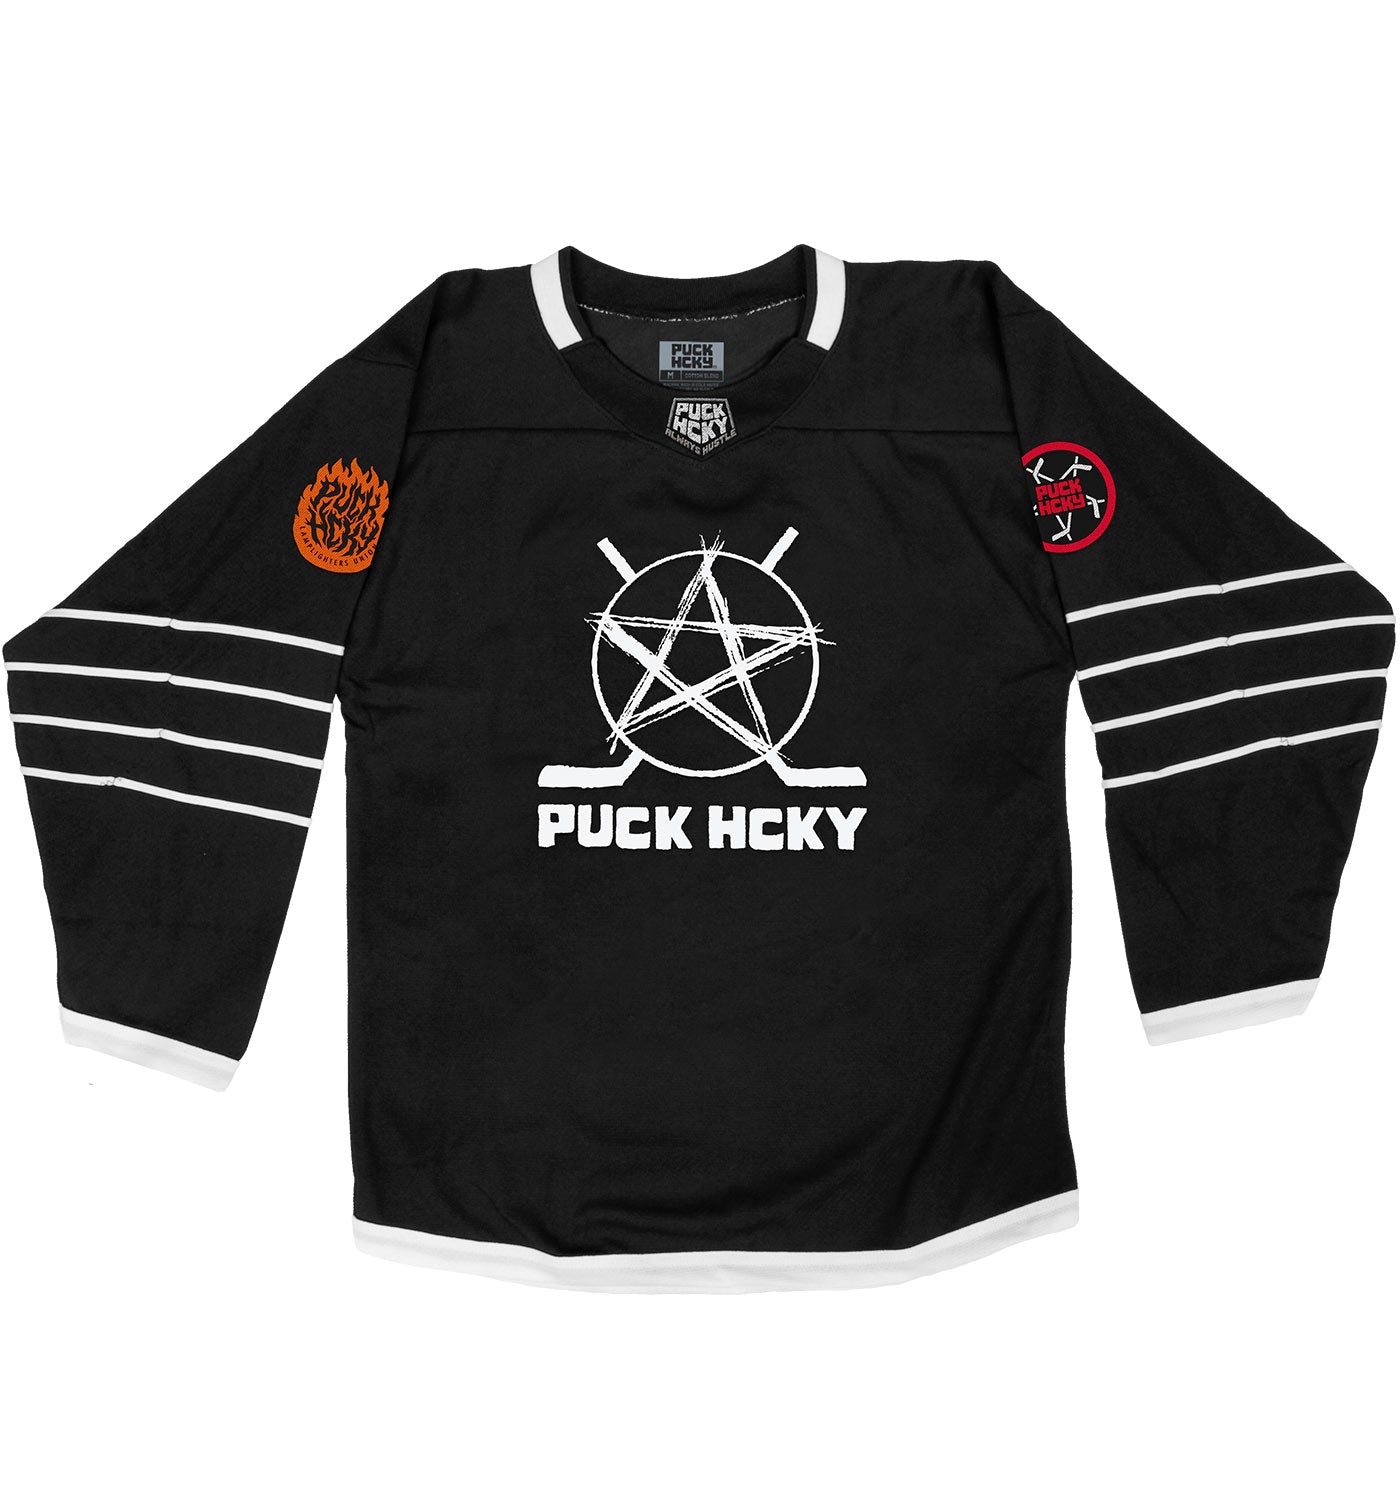 PUCK HCKY 'SKATE MARKS' hockey jersey in black and white